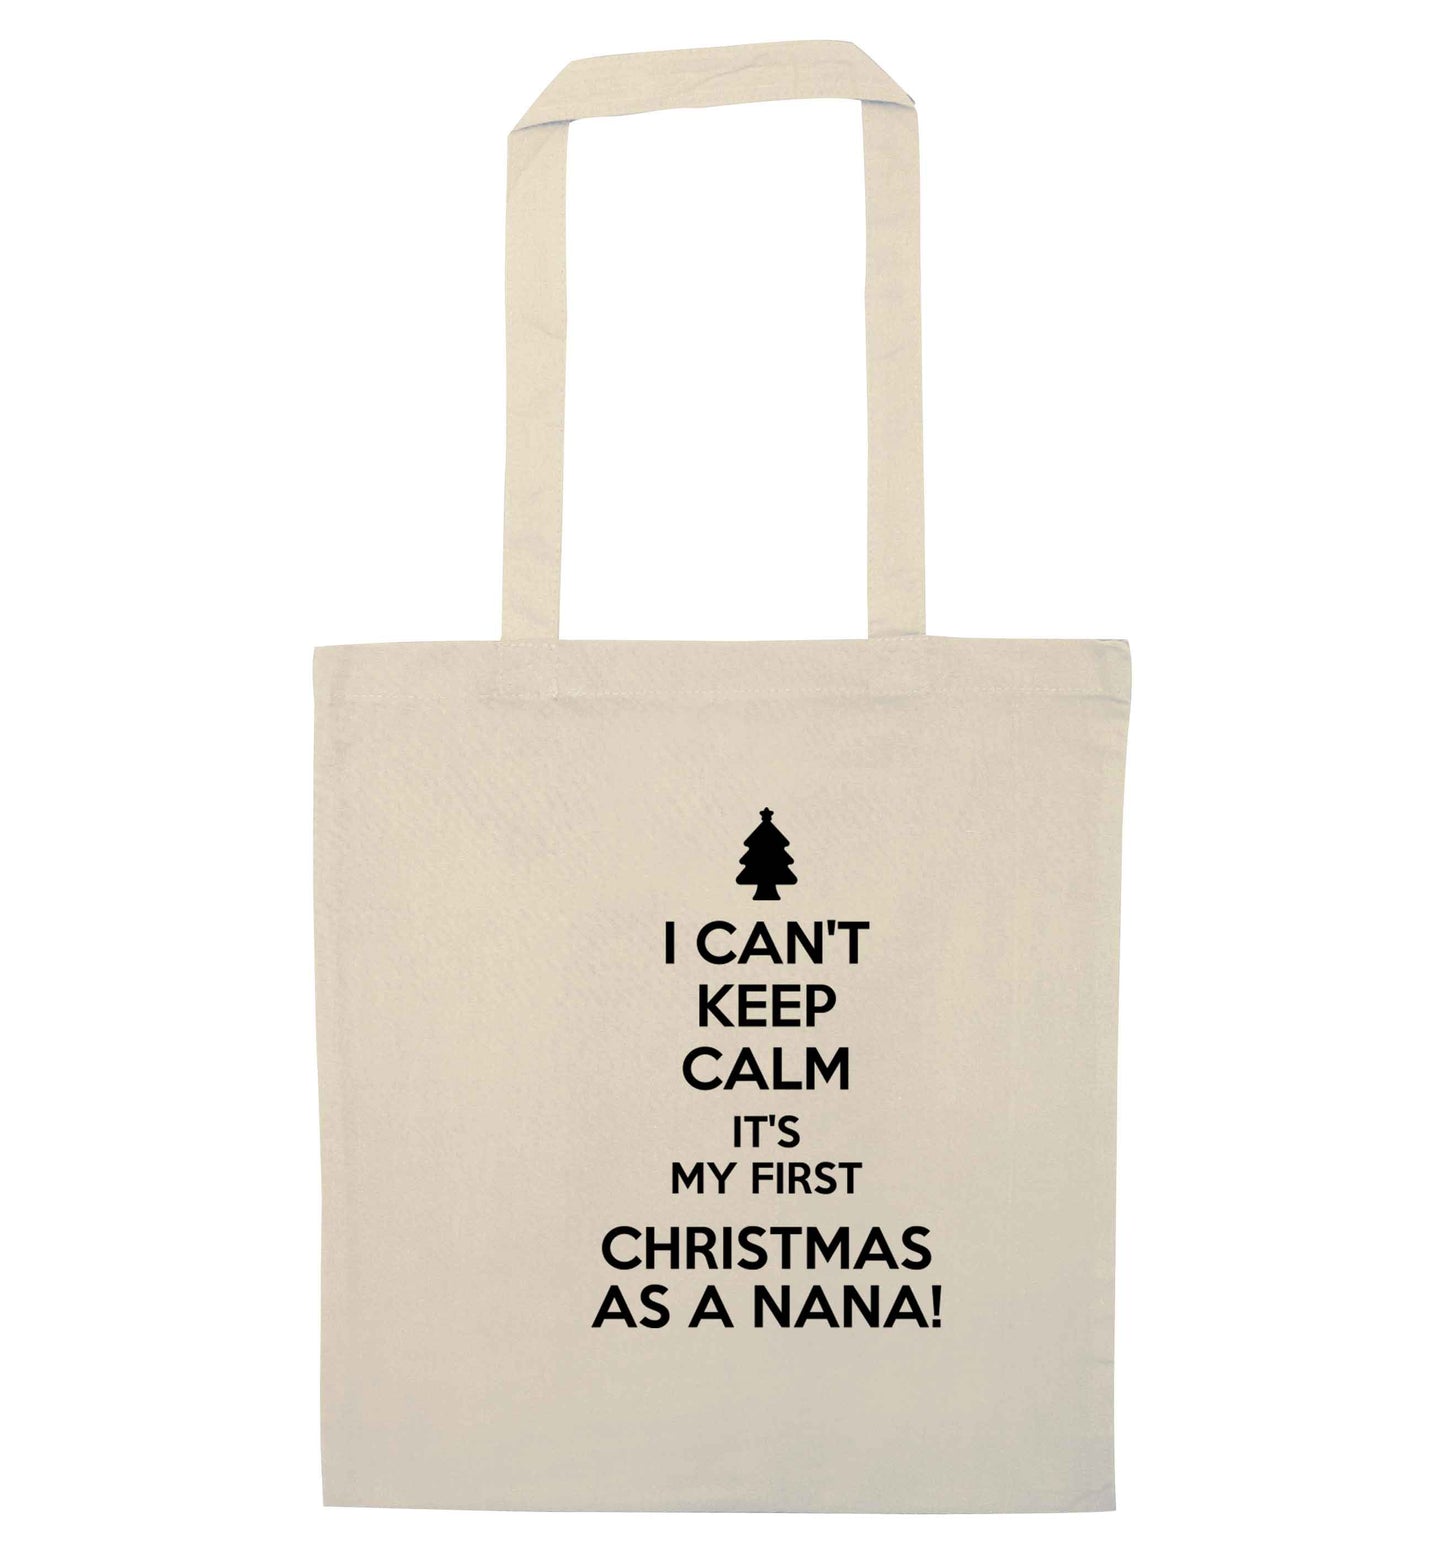 I can't keep calm it's my first Christmas as a nana! natural tote bag